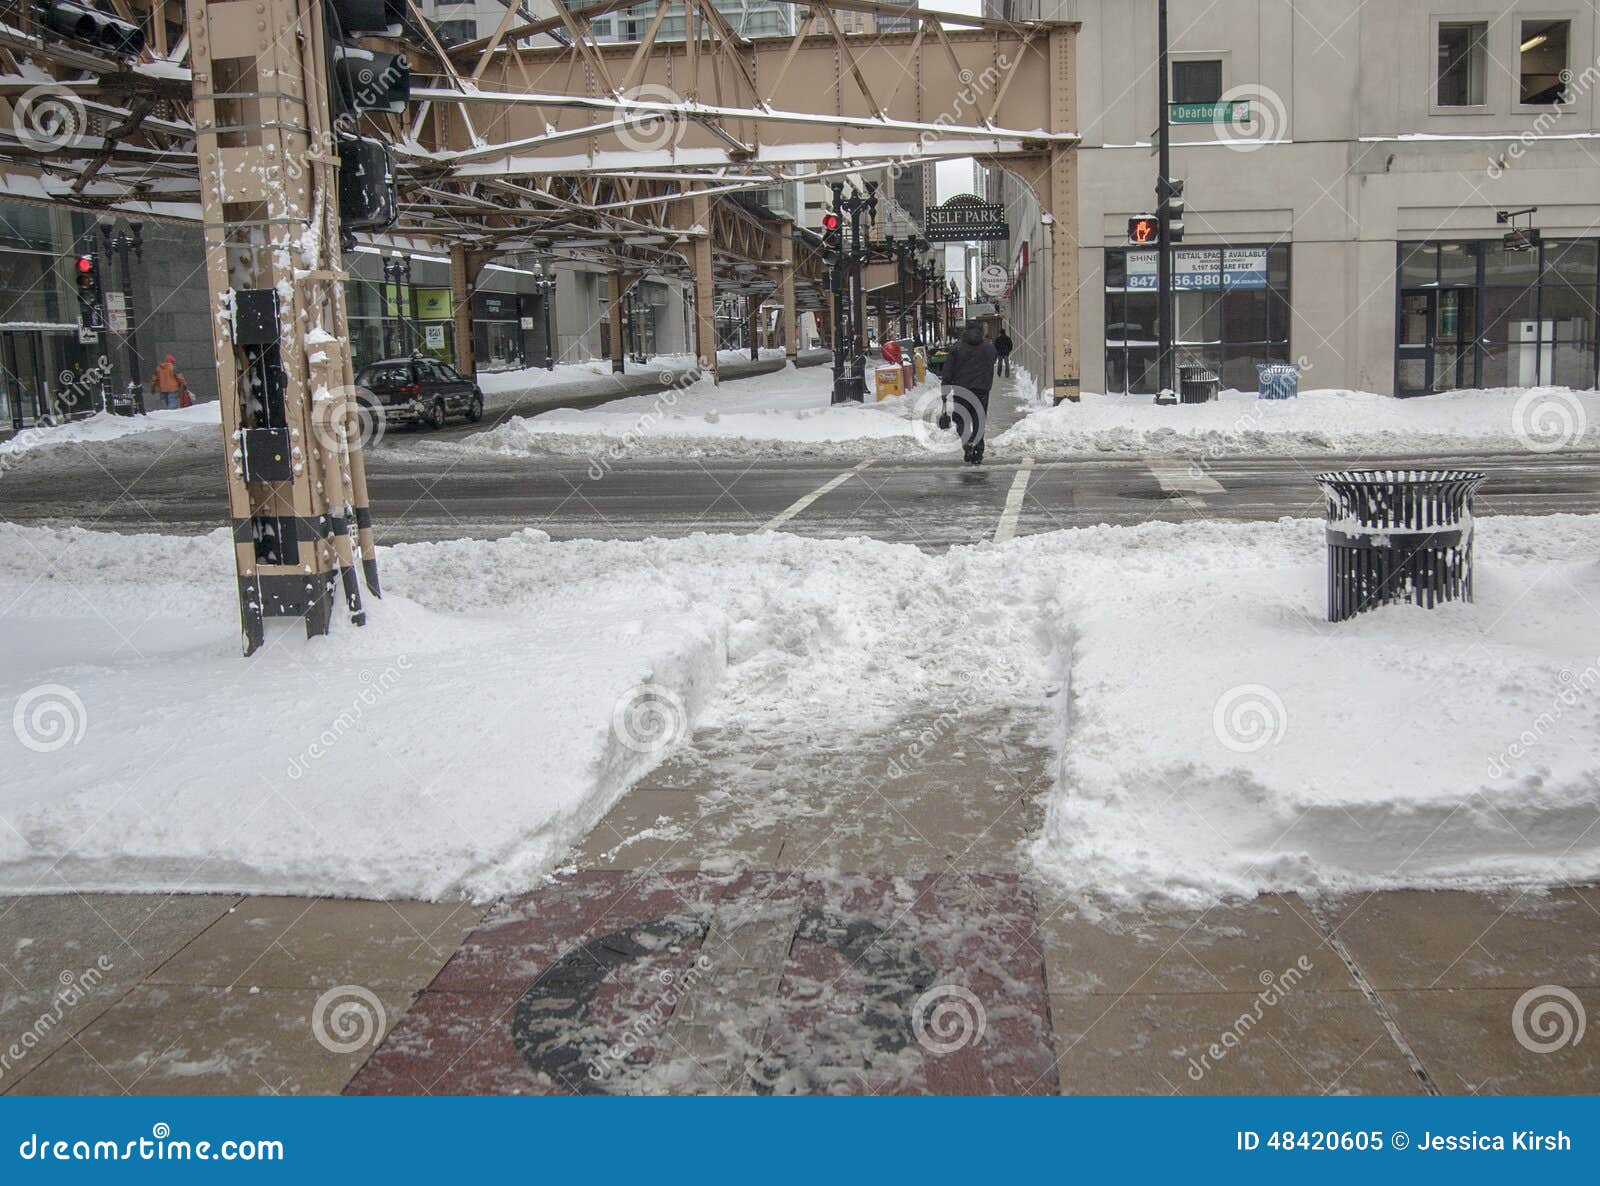 CHICAGO - FEBRUARY 2, 2011: the Morning after More Than 20 Inches of ...